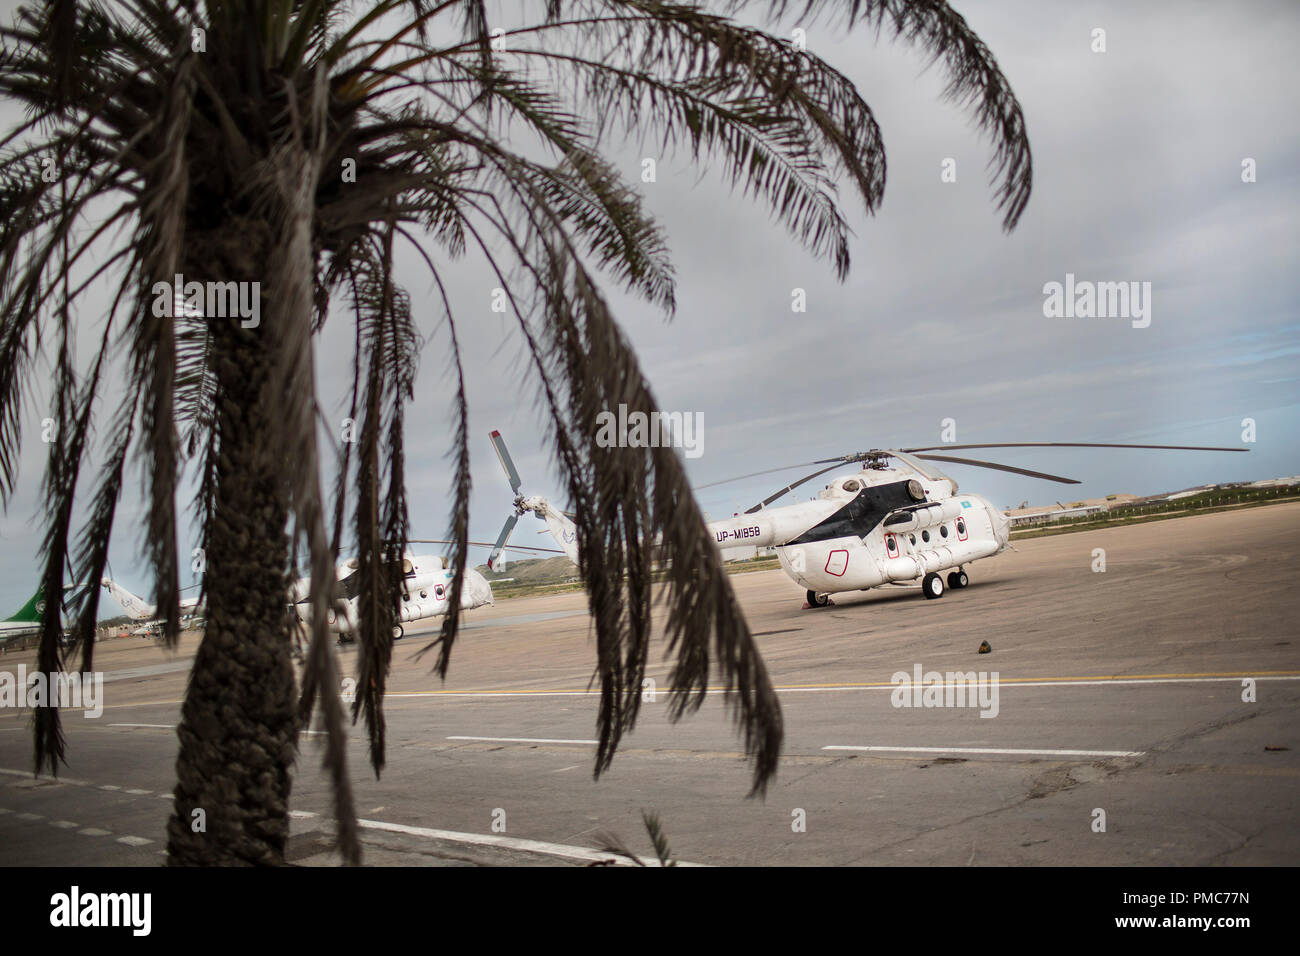 Helicopters are pictured on the runway of the Aden Abdulle airport inside the African Union Mission in Somalia (AMISOM) base in Mogadishu, Somalia, Au Stock Photo